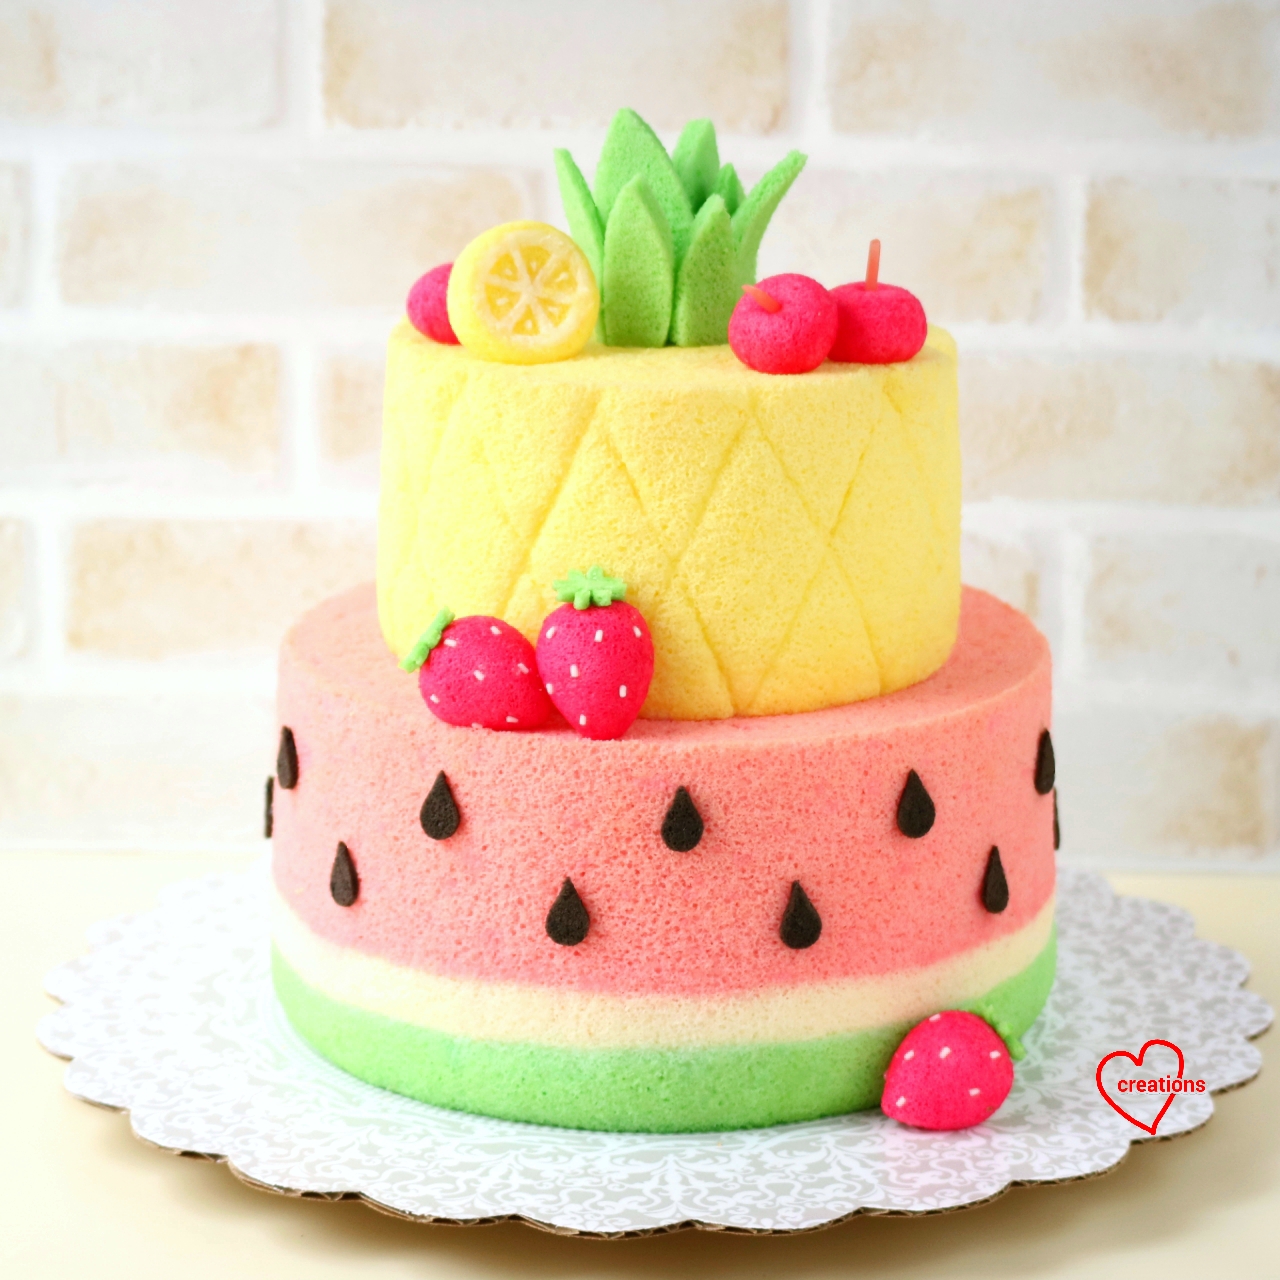 Loving Creations for You: 'Pineapple Watermelon' Fruits ...